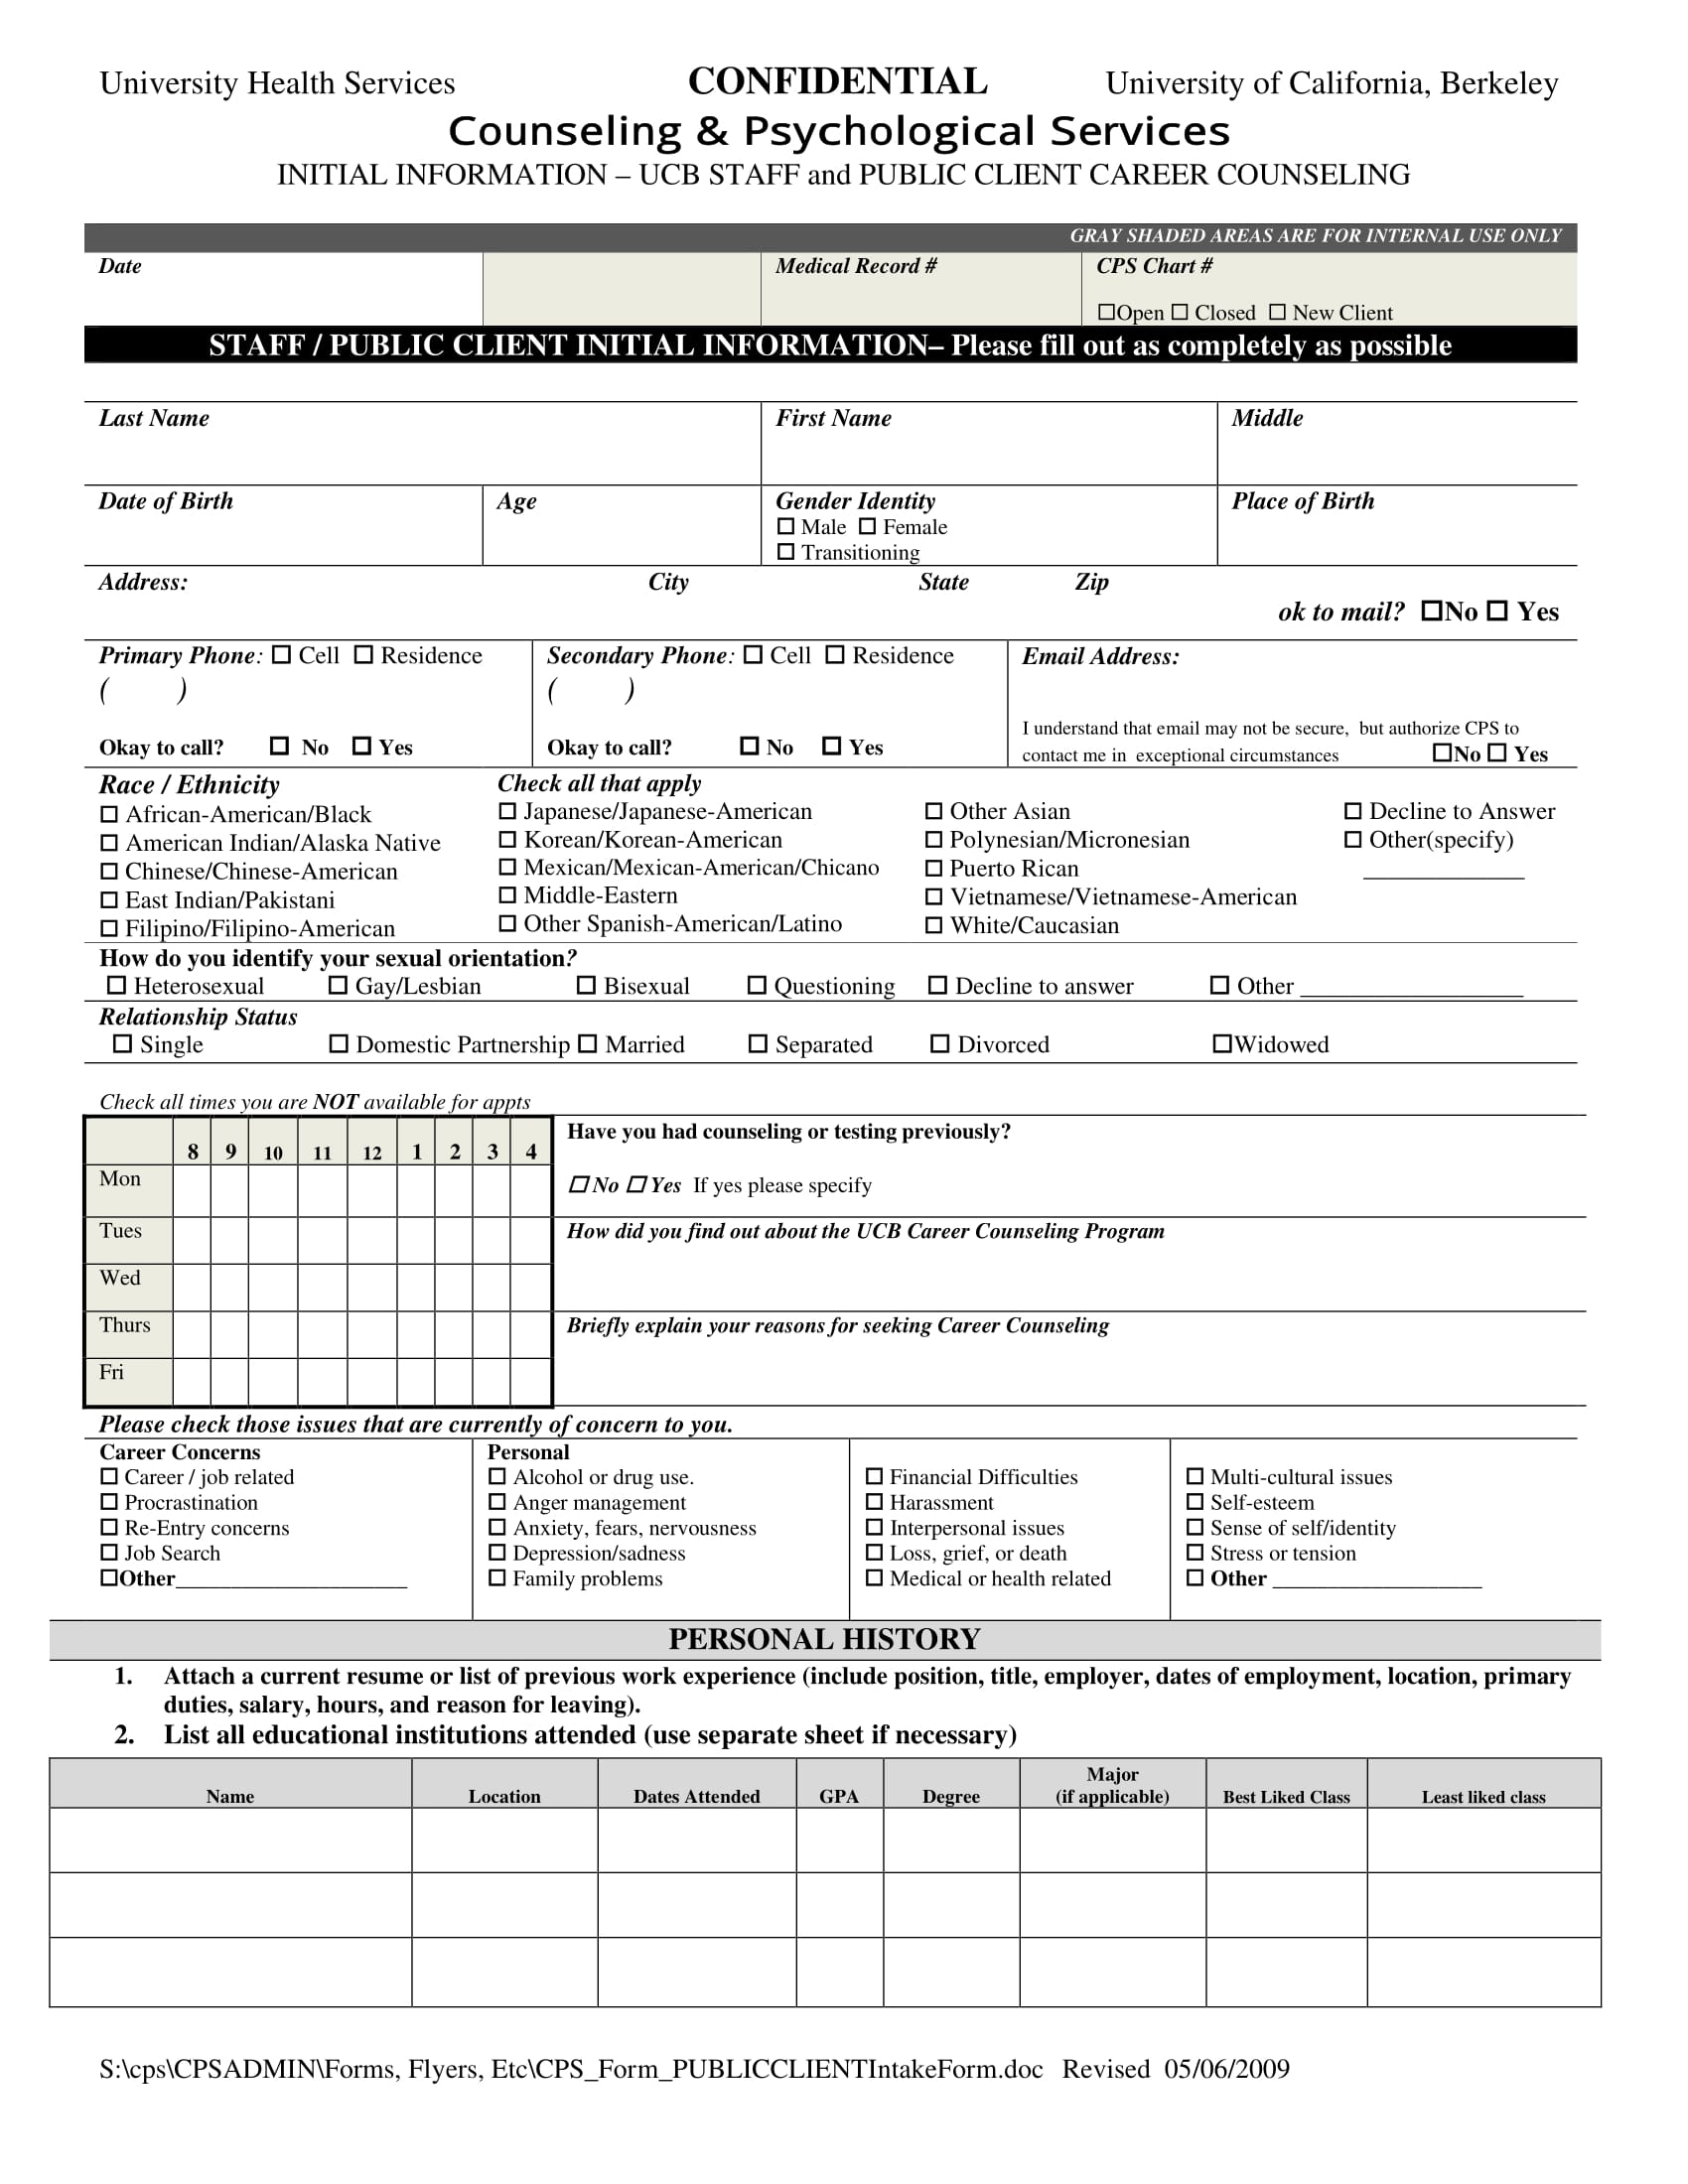 confidential counseling statement form 1